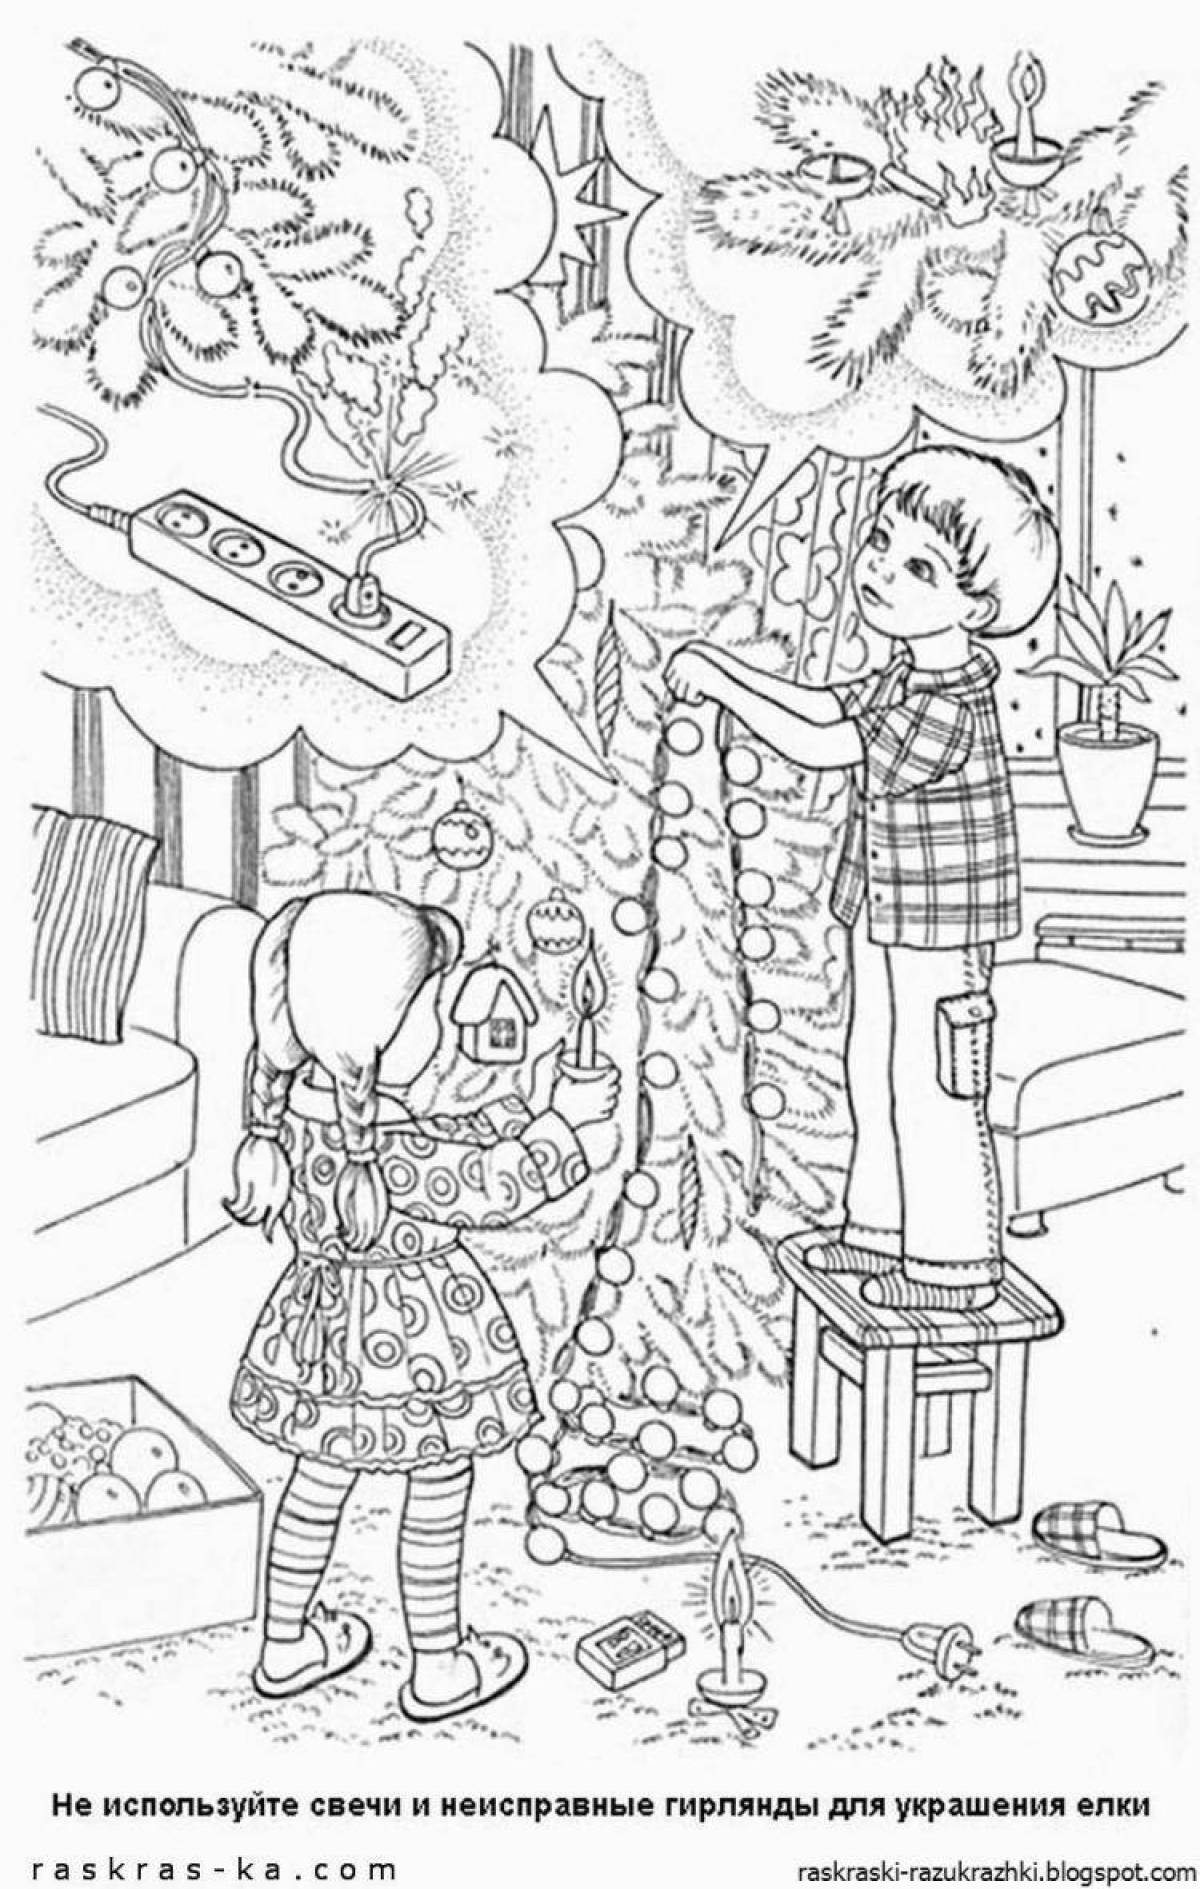 Safe new year coloring book